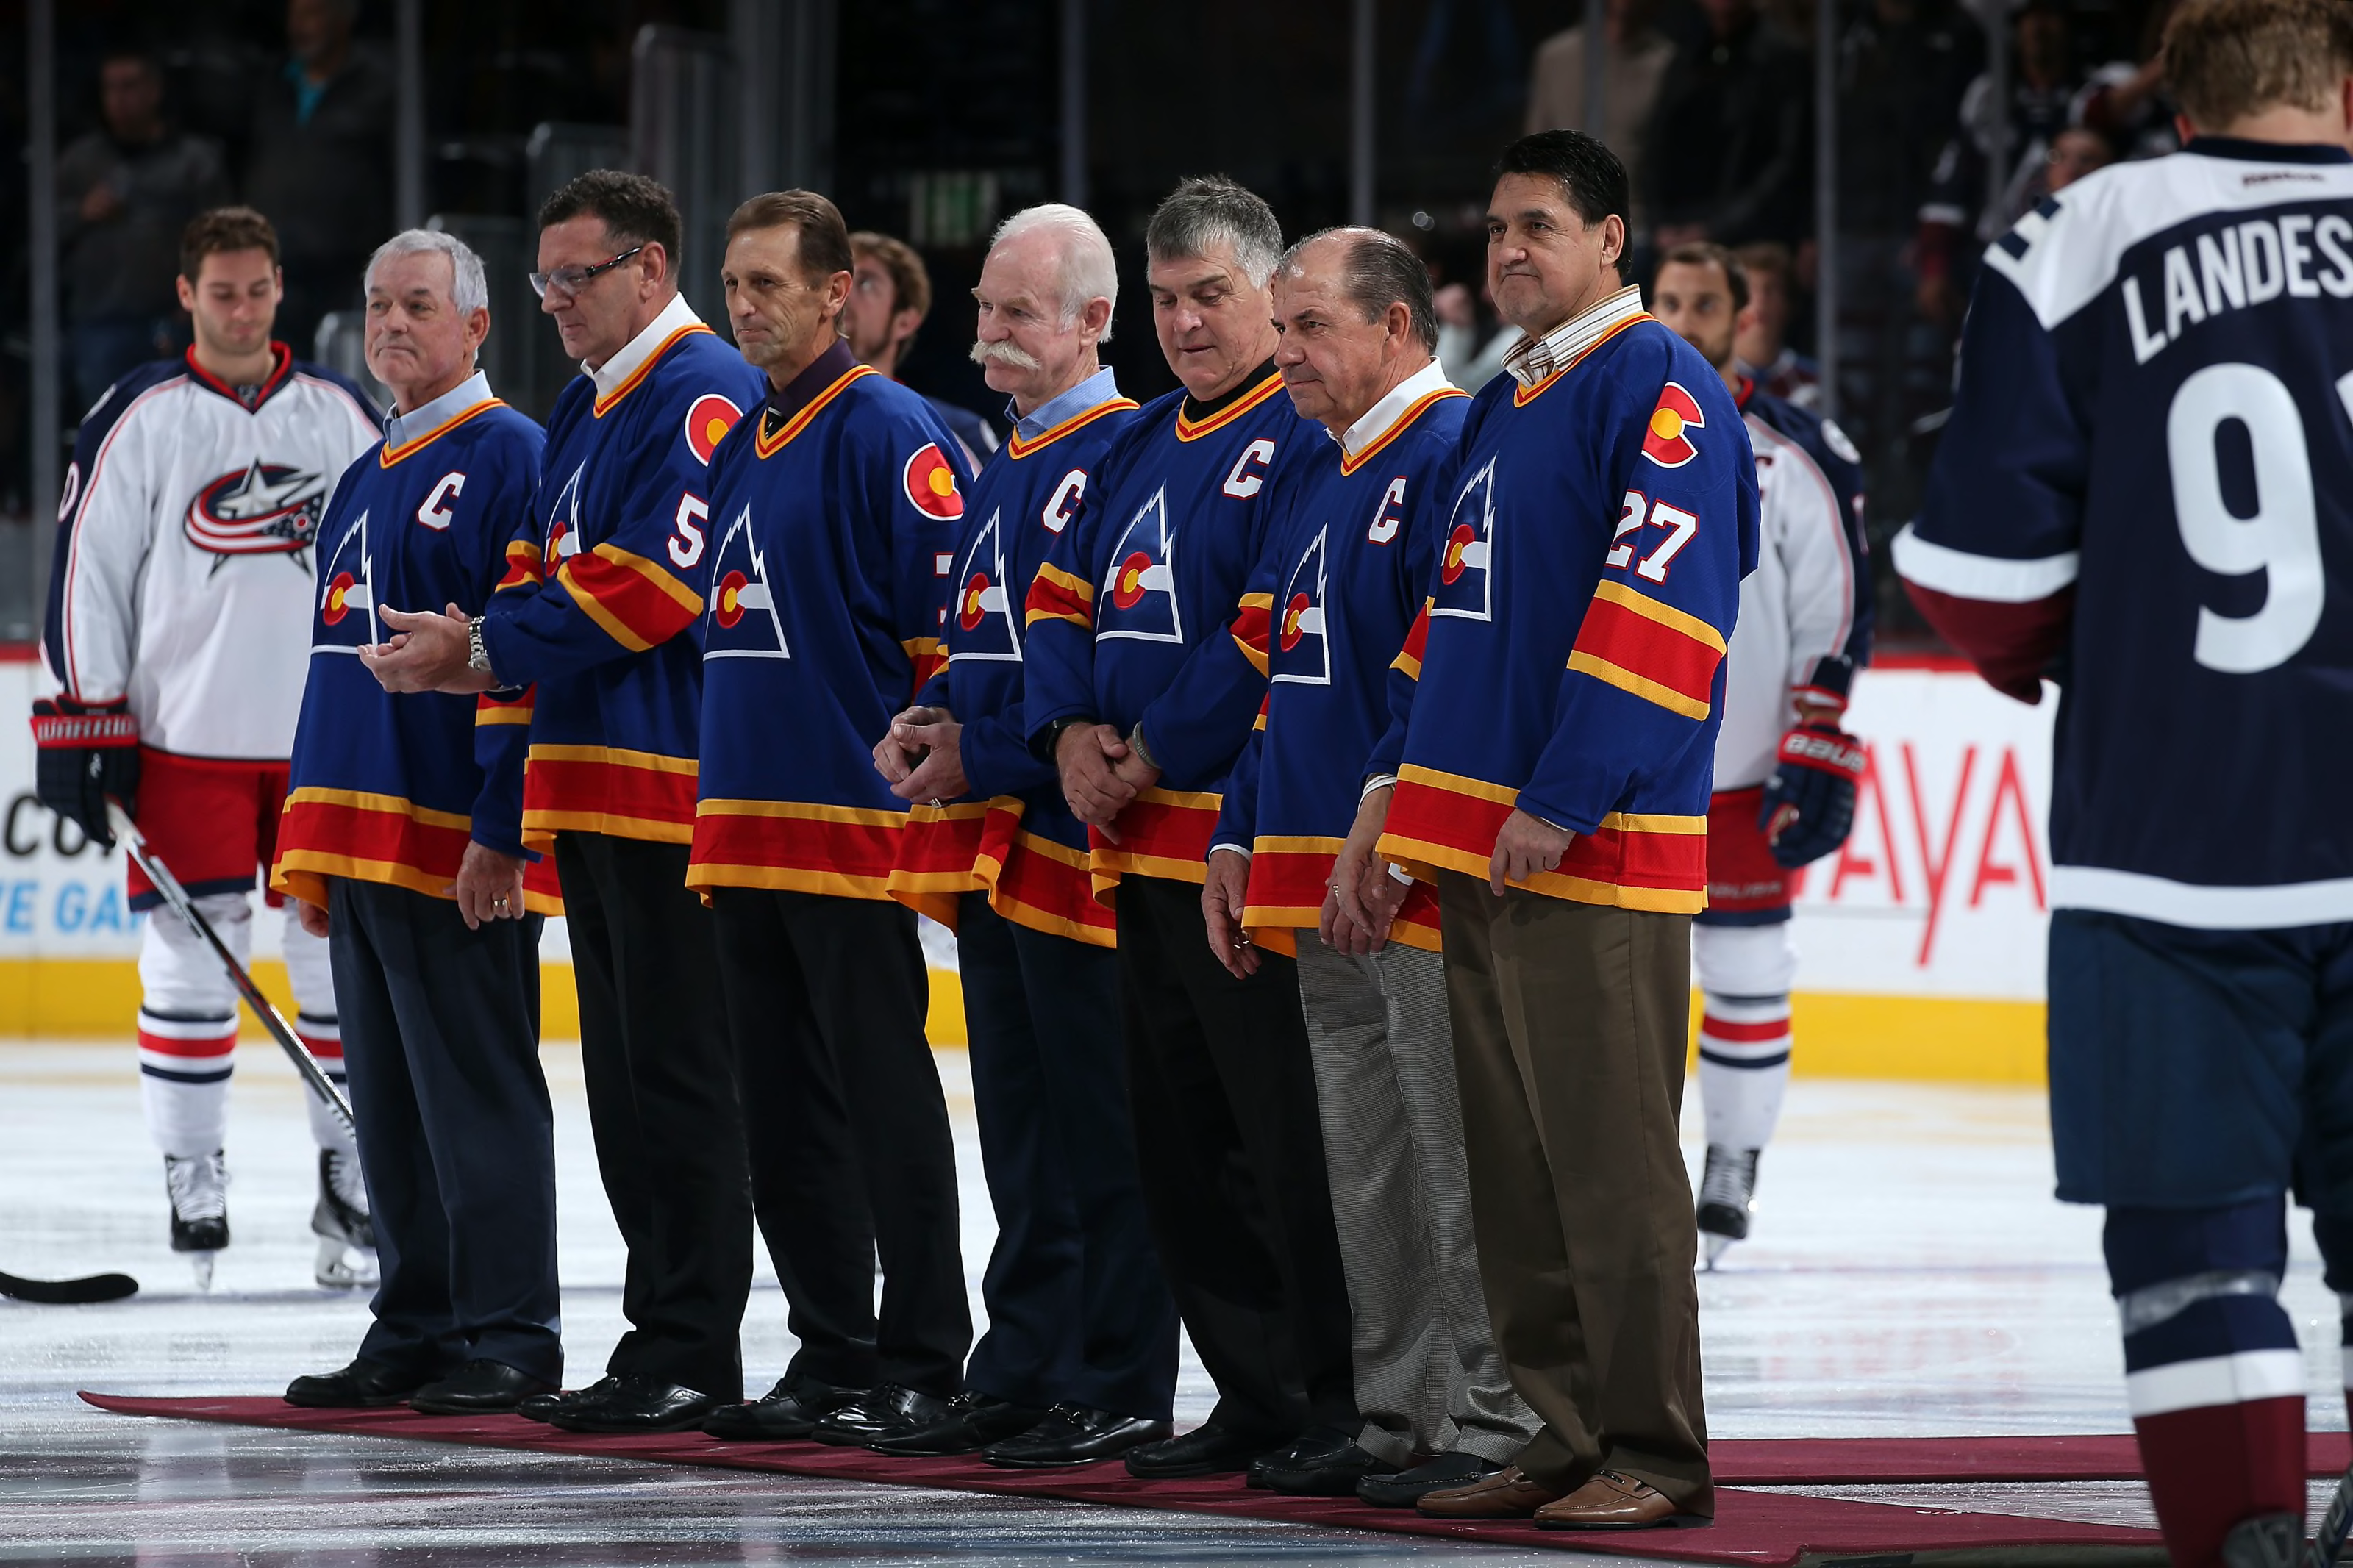 John McMullen, owner of the Houston Astros and the New Jersey Hockey  News Photo - Getty Images